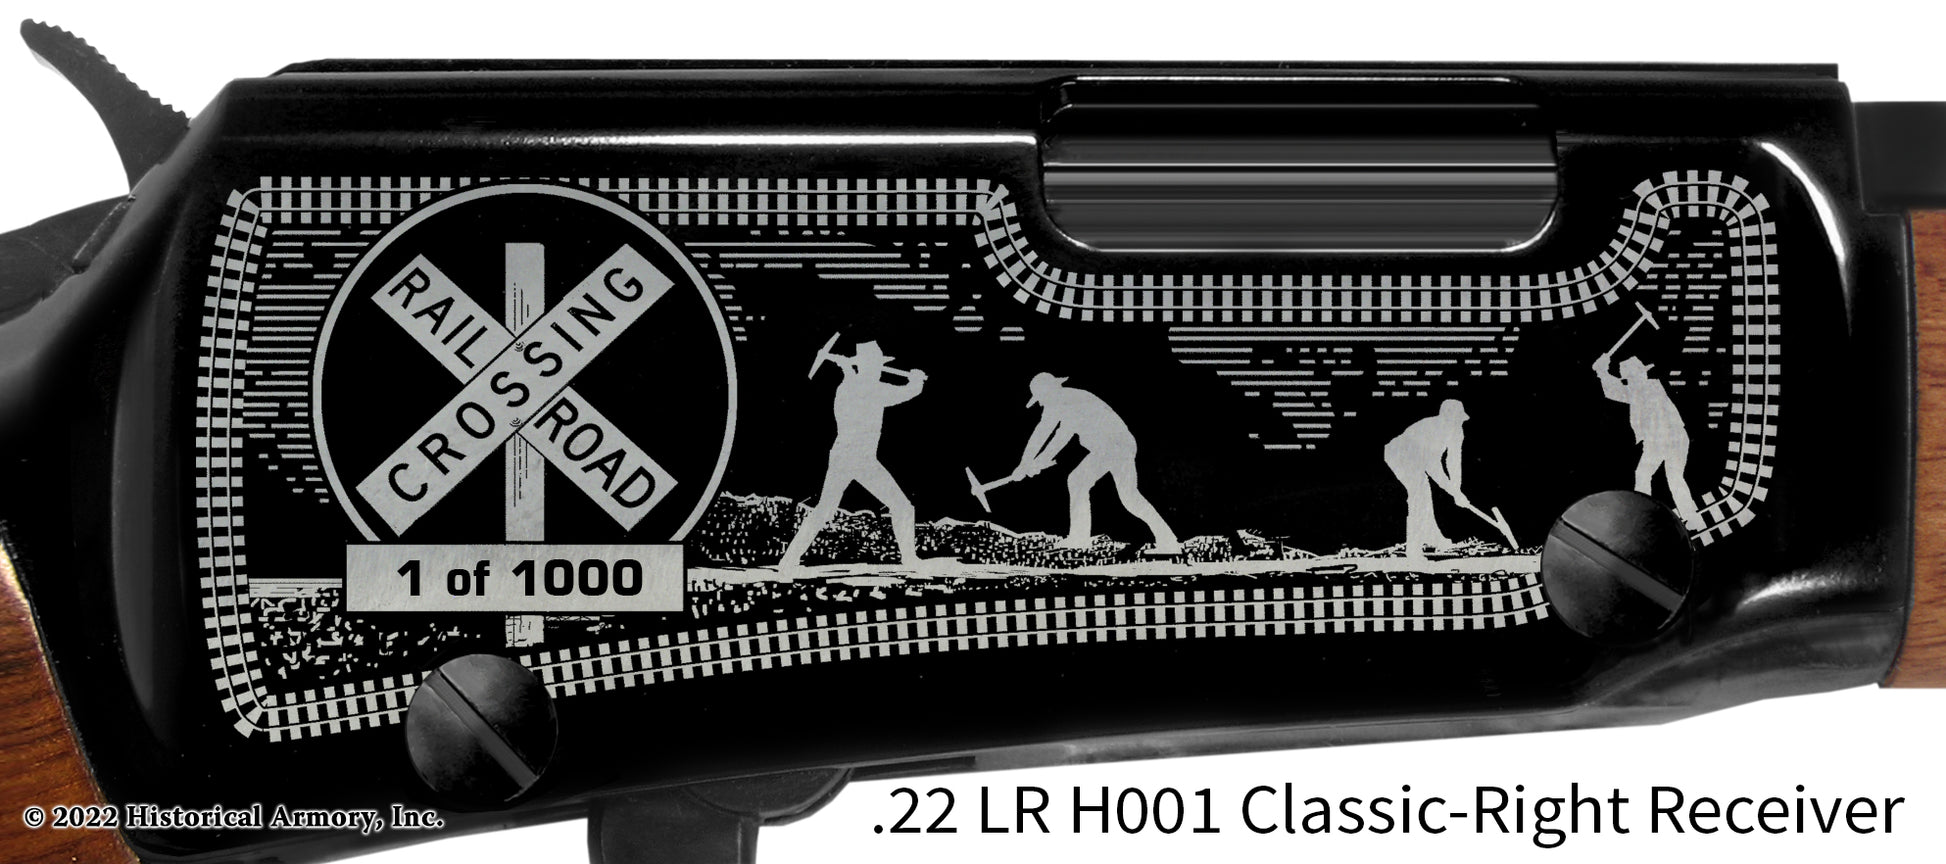 Working on the Railroad detail of Henry rifle engraving